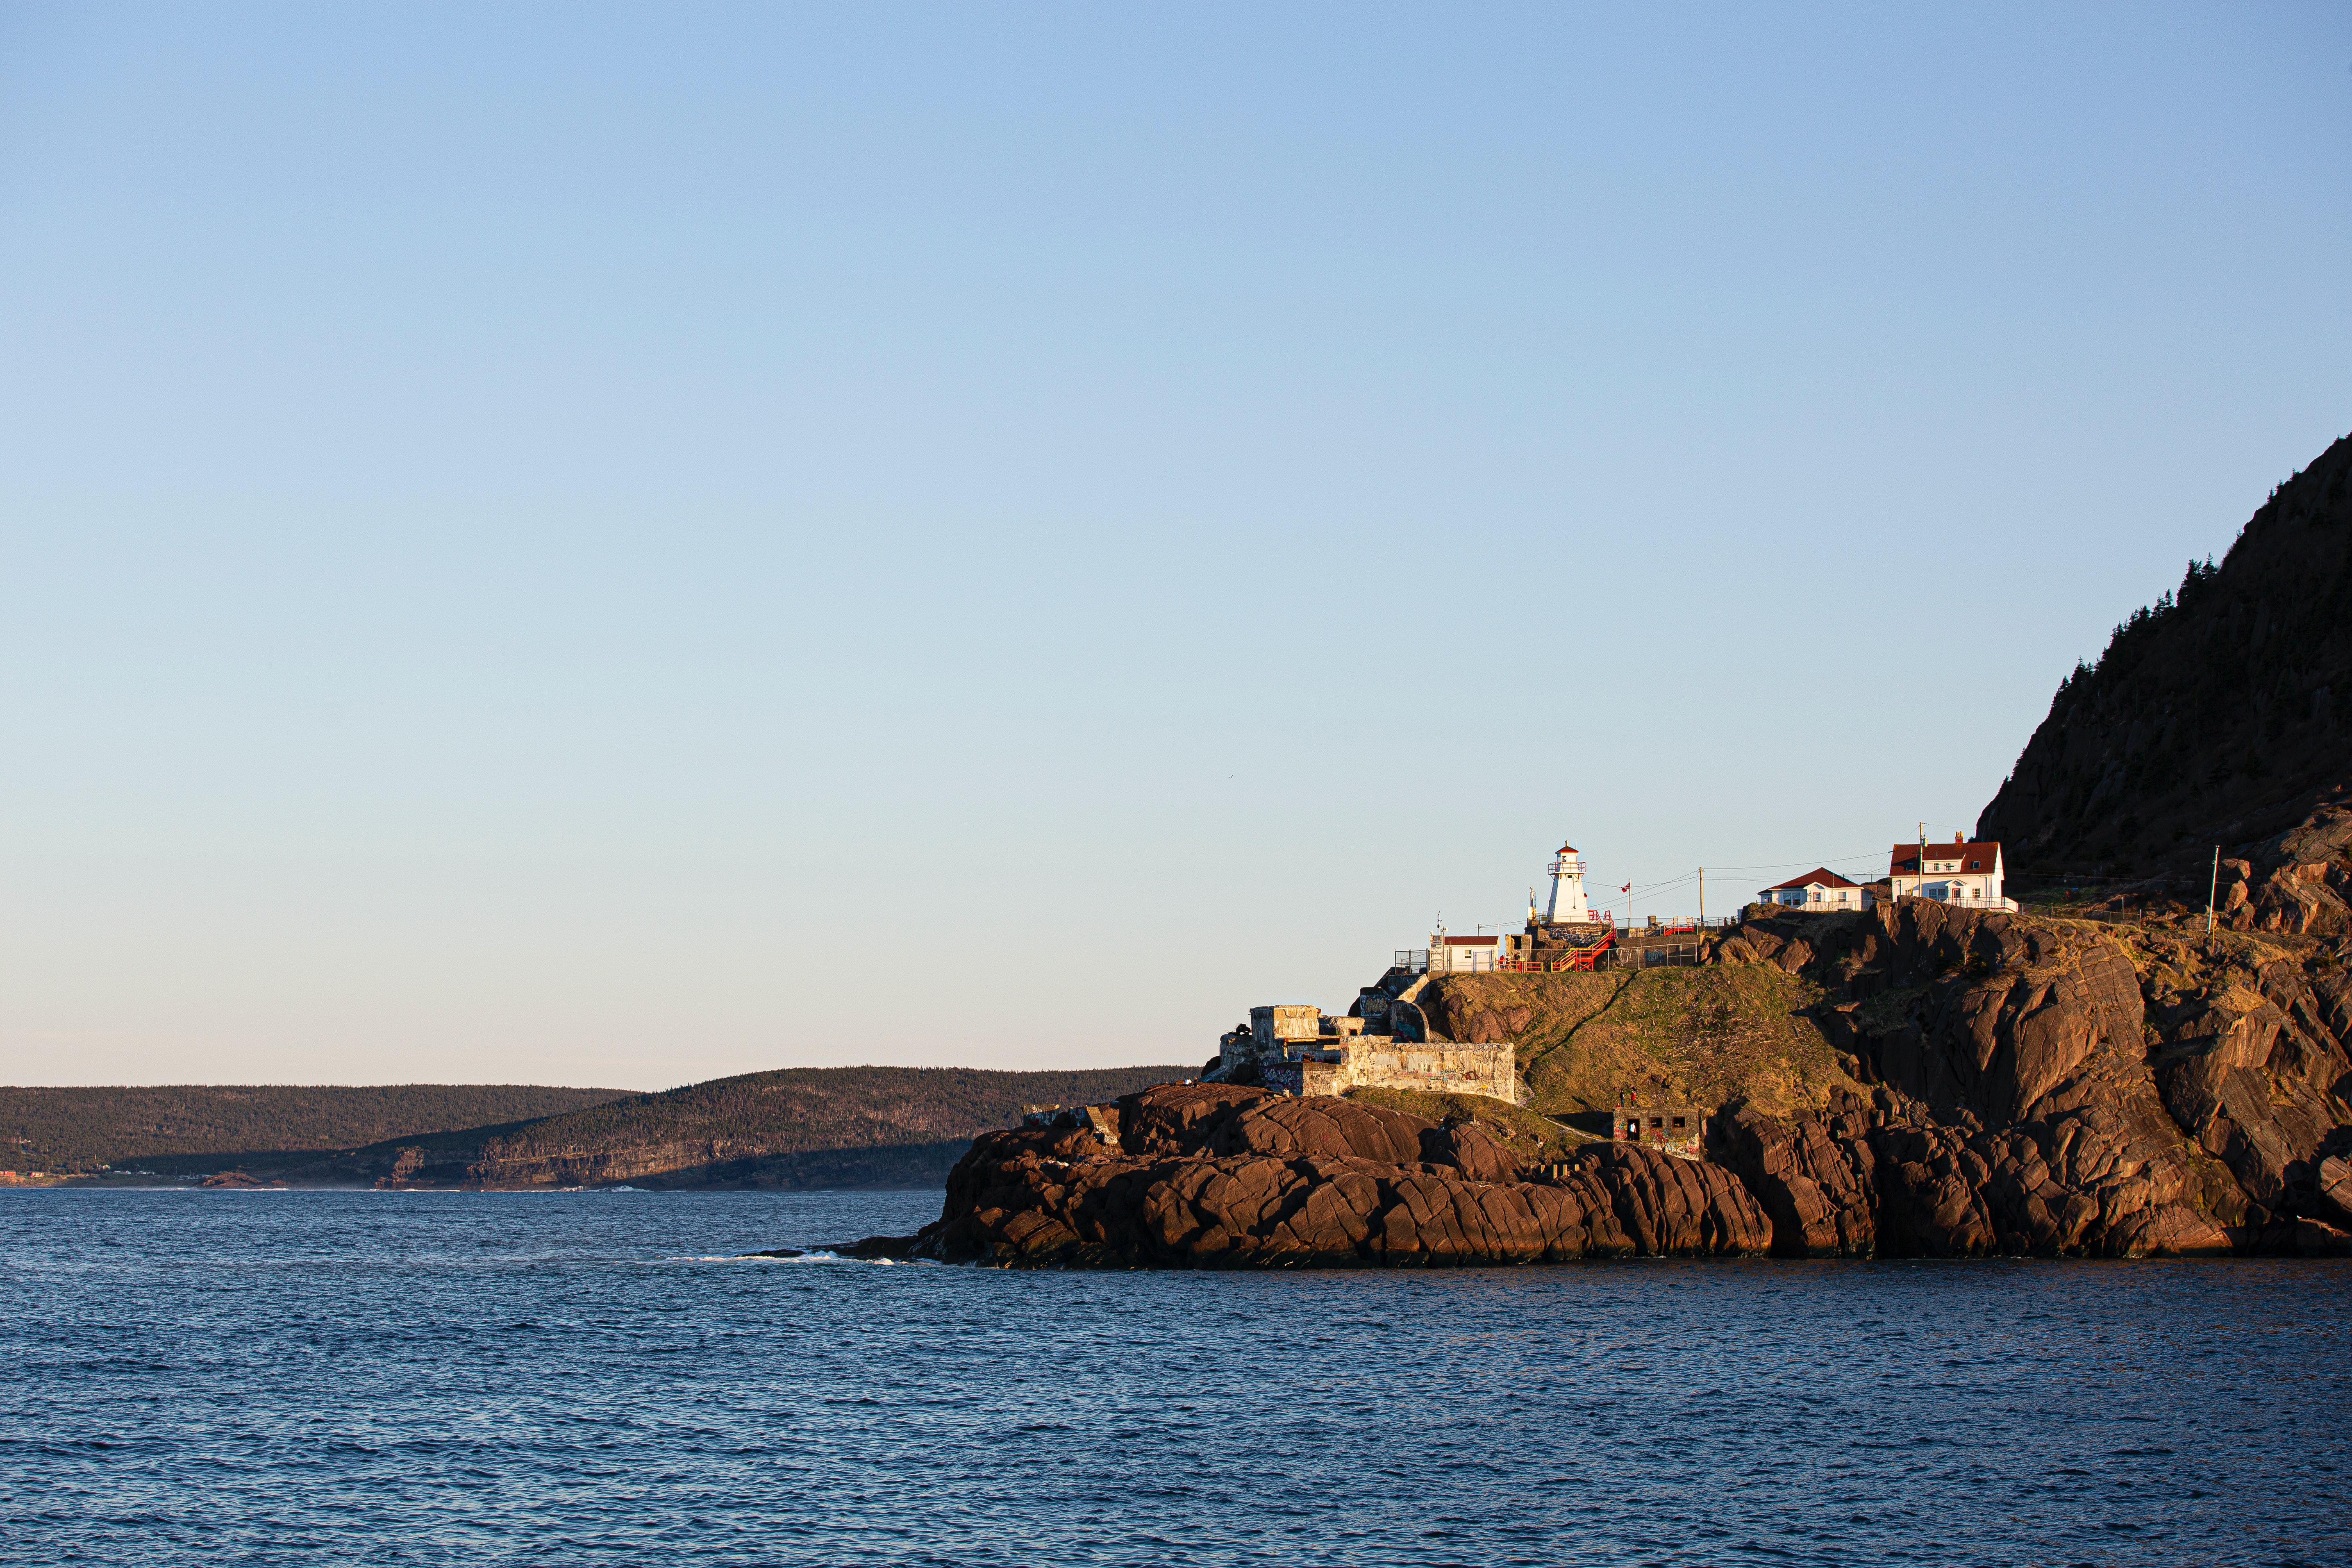 Costal view of a light house and other buildings on a headland